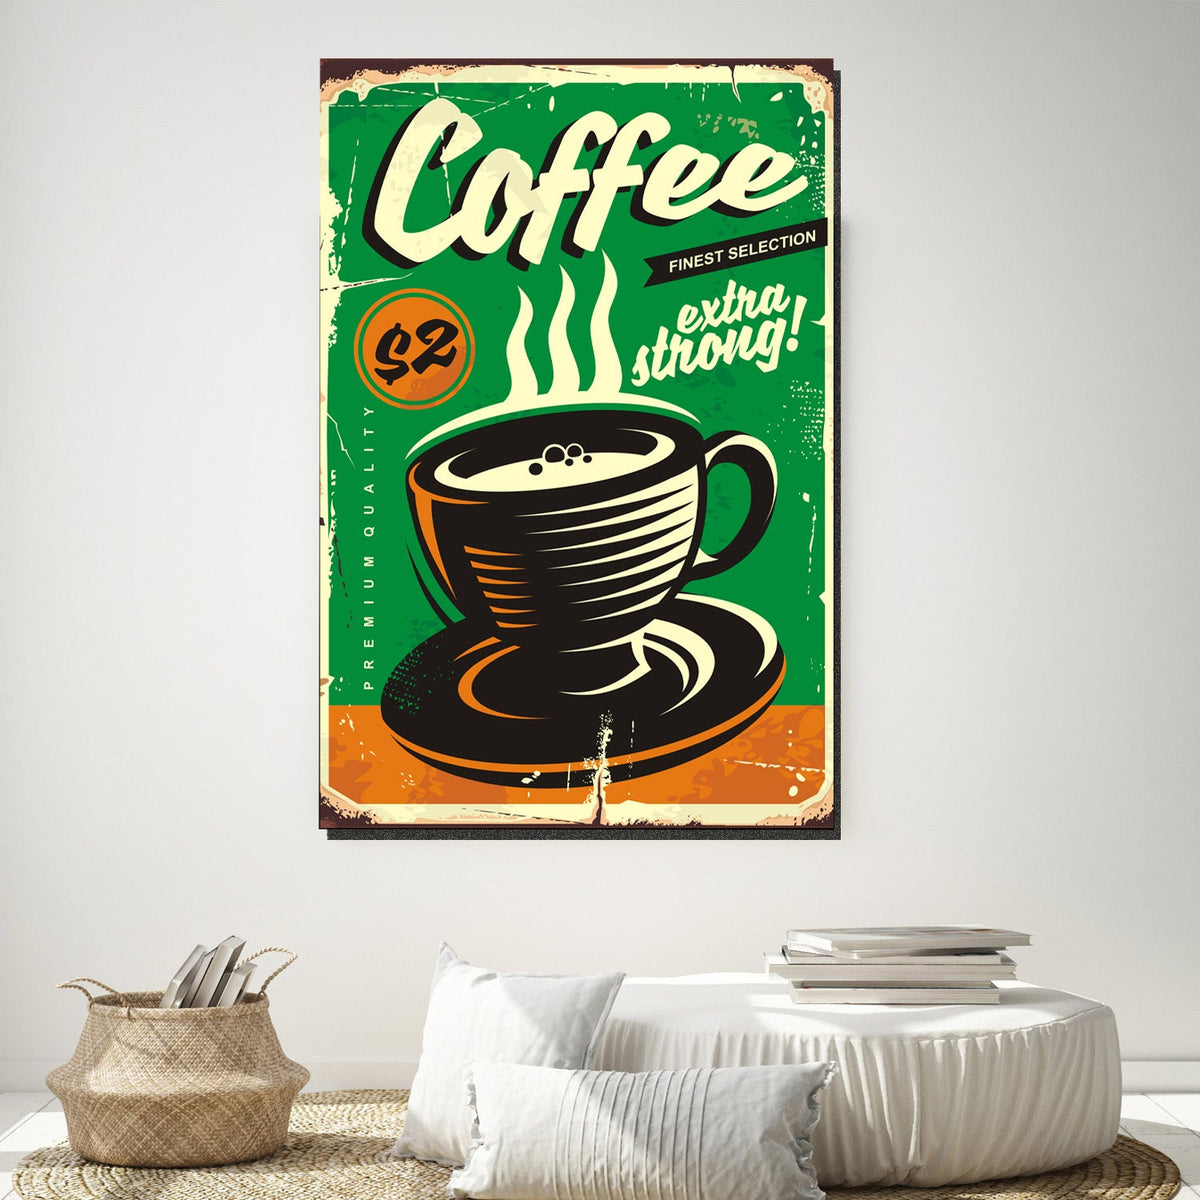 https://cdn.shopify.com/s/files/1/0387/9986/8044/products/CoffeeVintageTinSignCanvasArtprintStretched-3.jpg